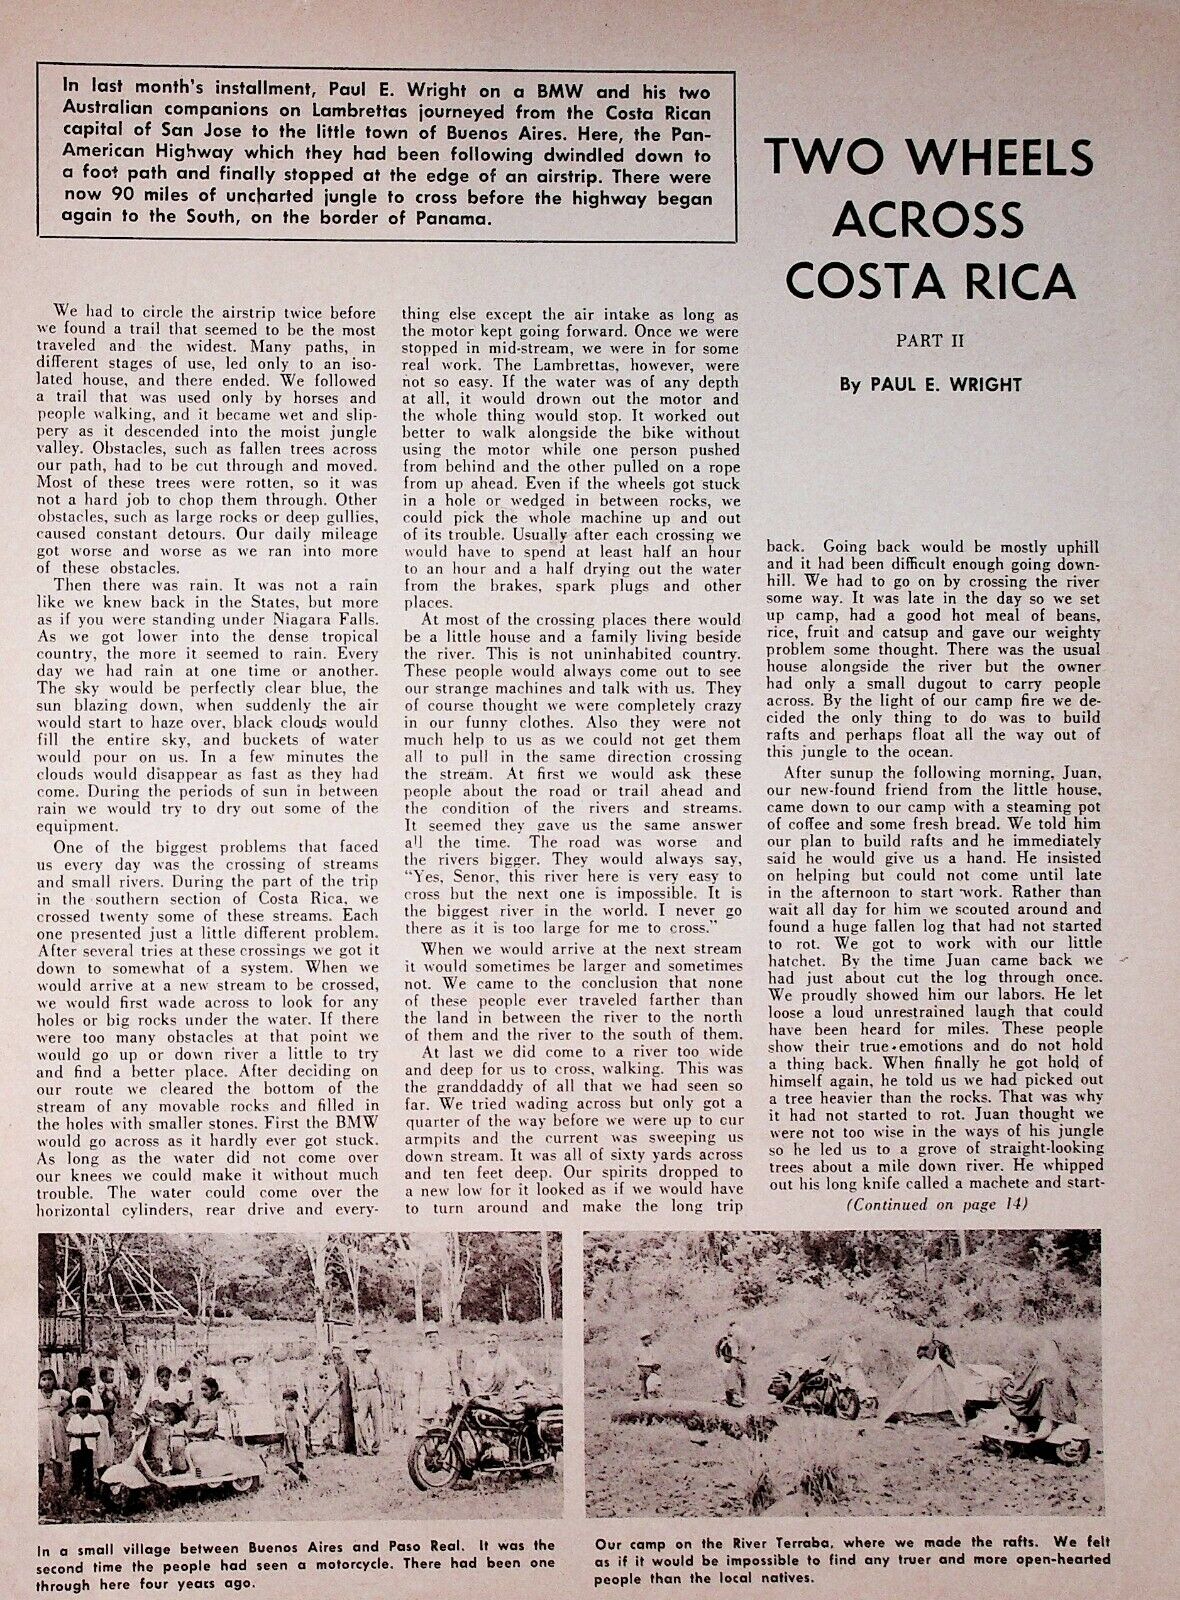 1960 Two Wheels Across Costa Rica - 3-Page Vintage Motorcycle Touring Article